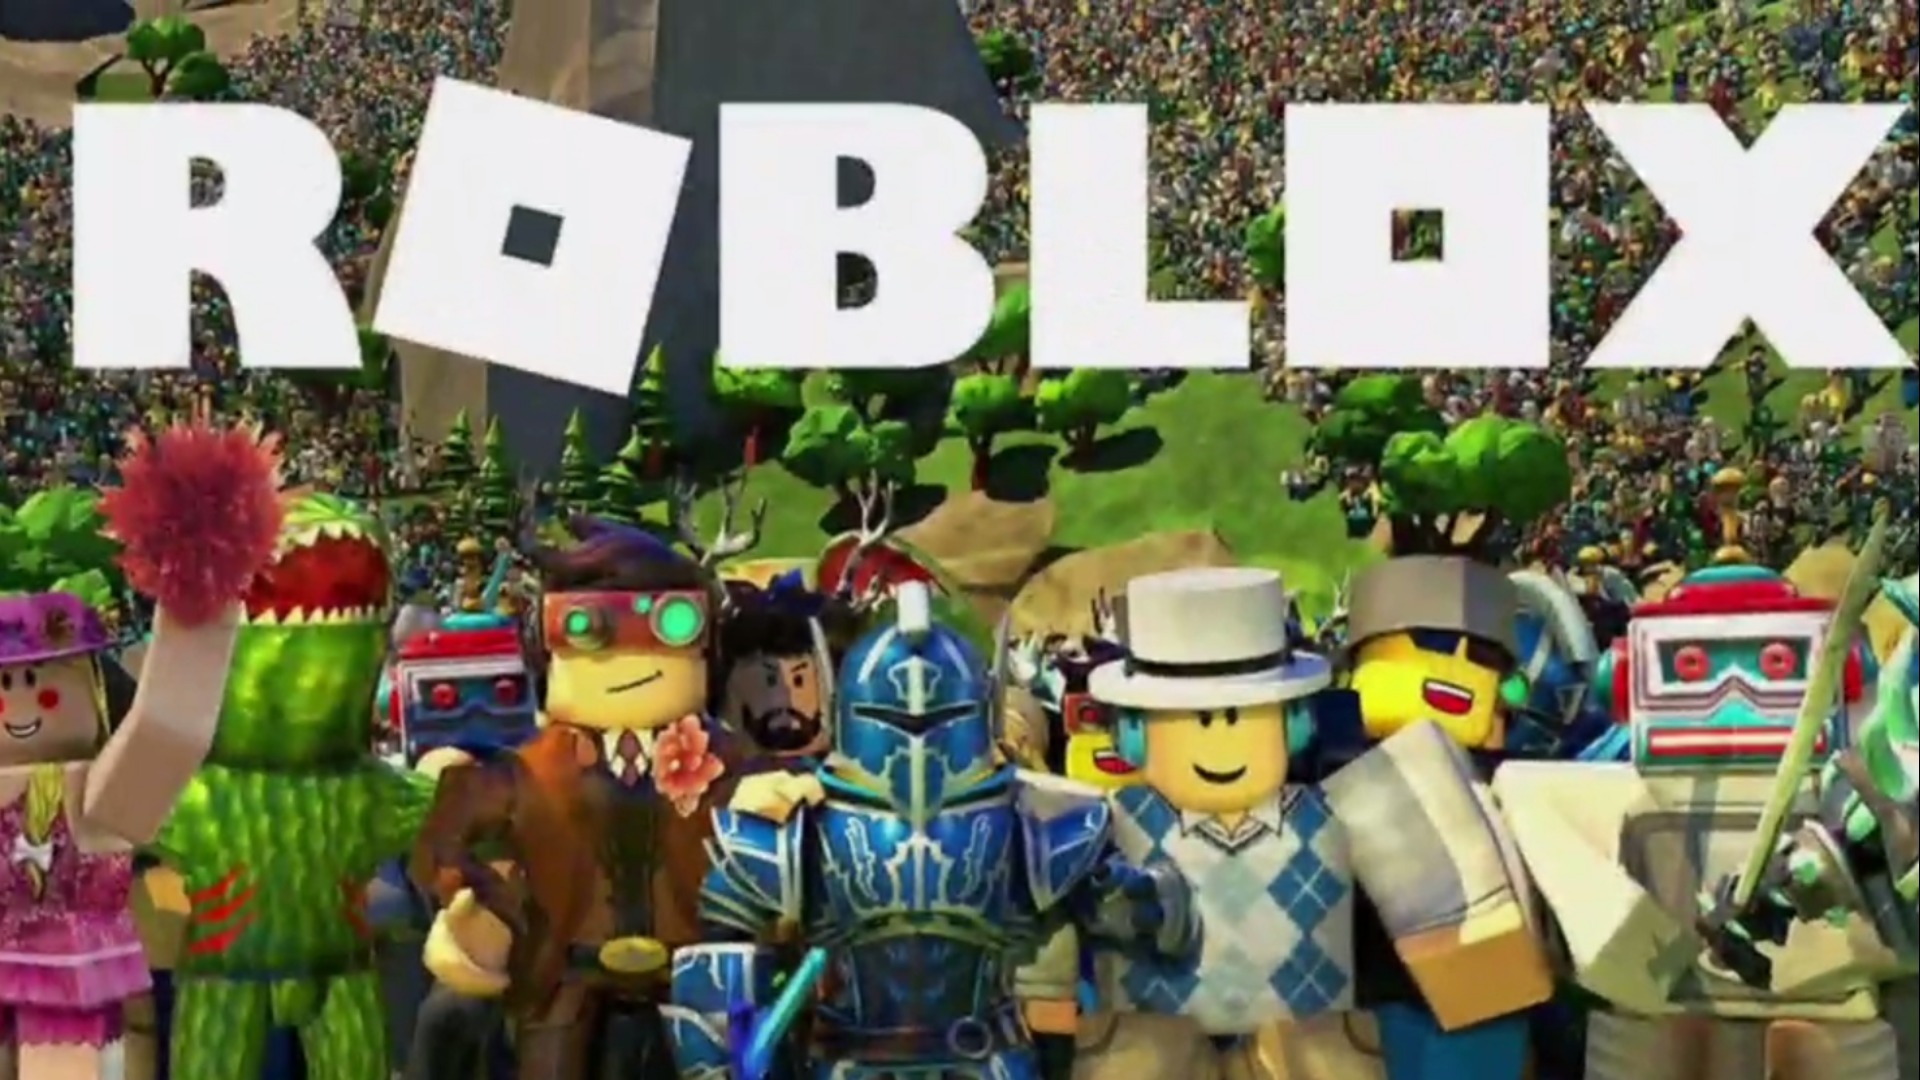 New Questions About Some Inappropriate Content On The Gaming Platform Roblox Video - roblox animation extension